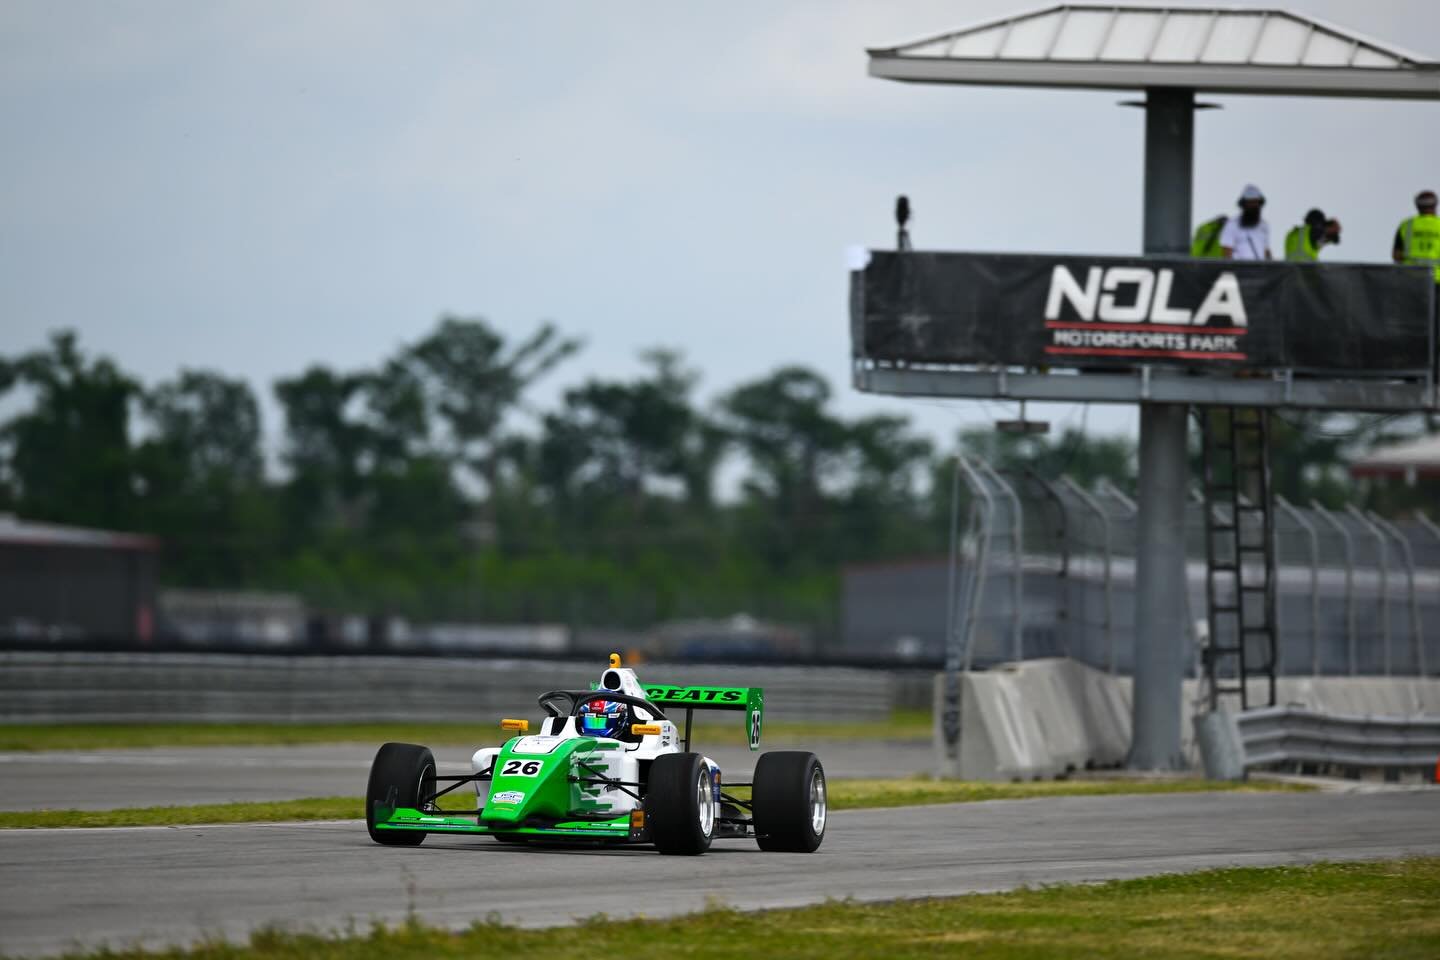 Tough end to Nola coming away with two P8 finishes on track but one of them having a penalty come with it that put us back a few spots.

This weekend wasn&rsquo;t the result we hoped for but we will takeaway what we learnt and be back to our strong f